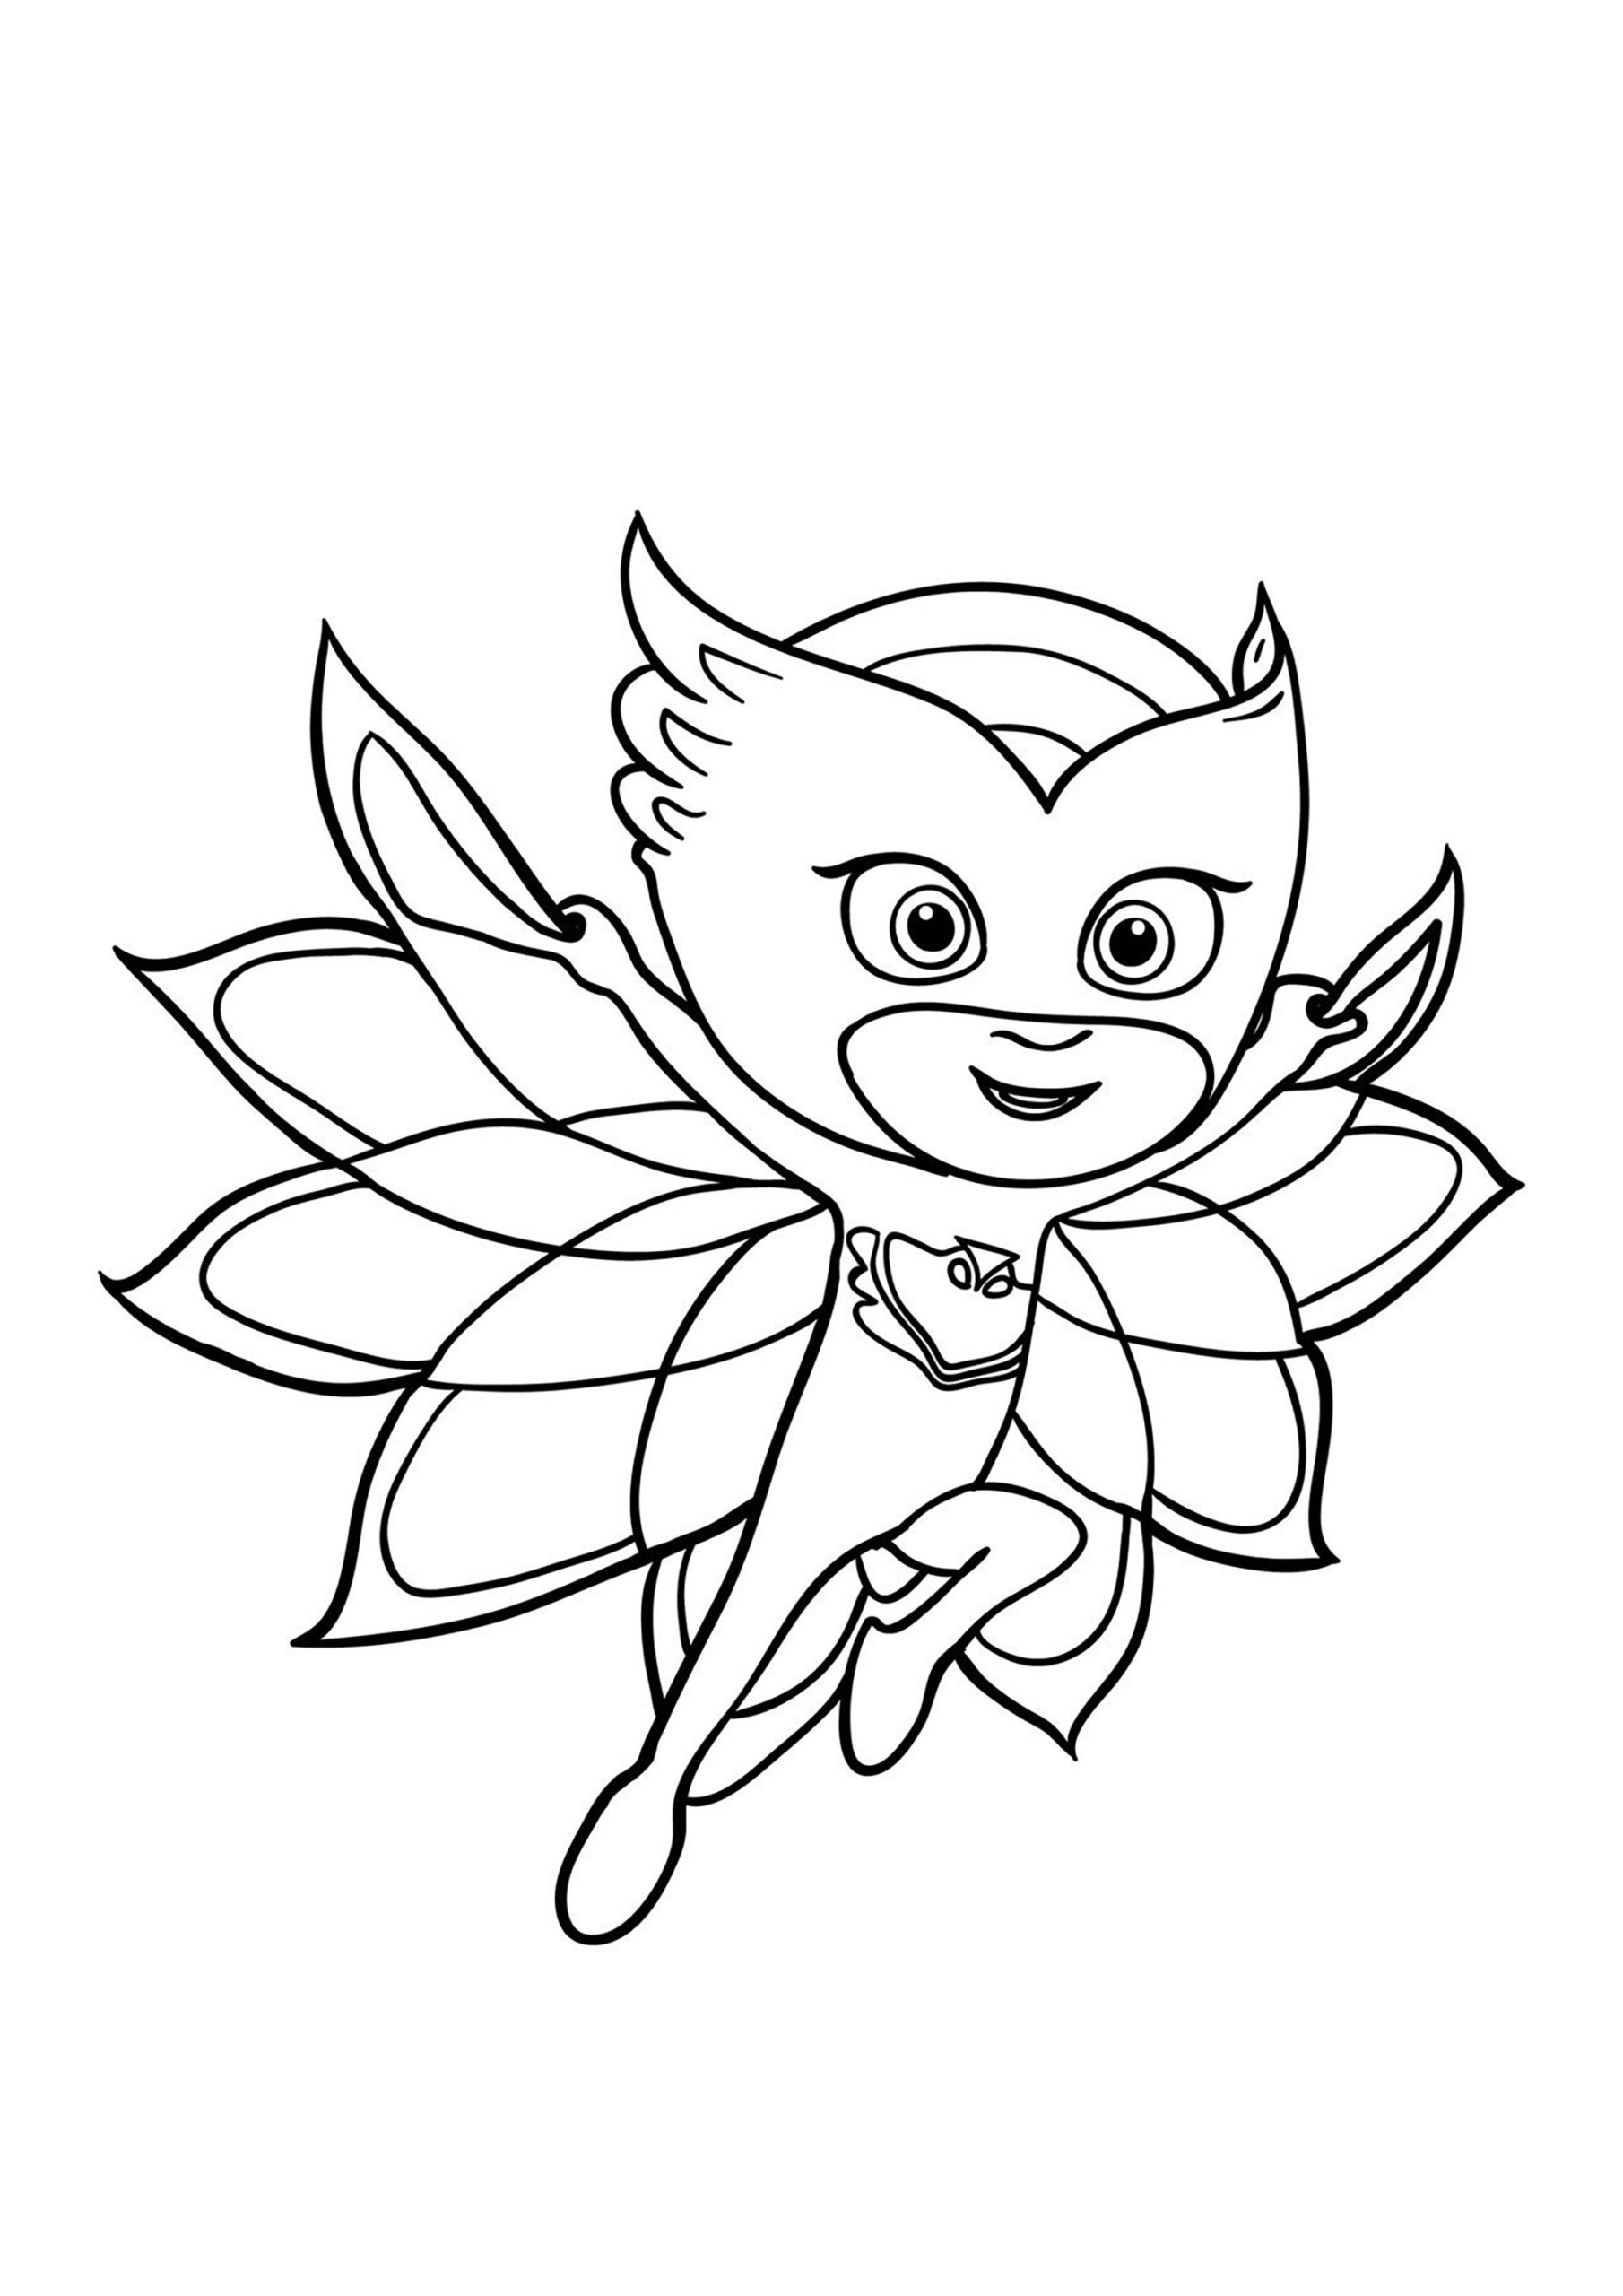 Coloring Pages : Coloring Pj Masks Free To Color For Kids Mask ...